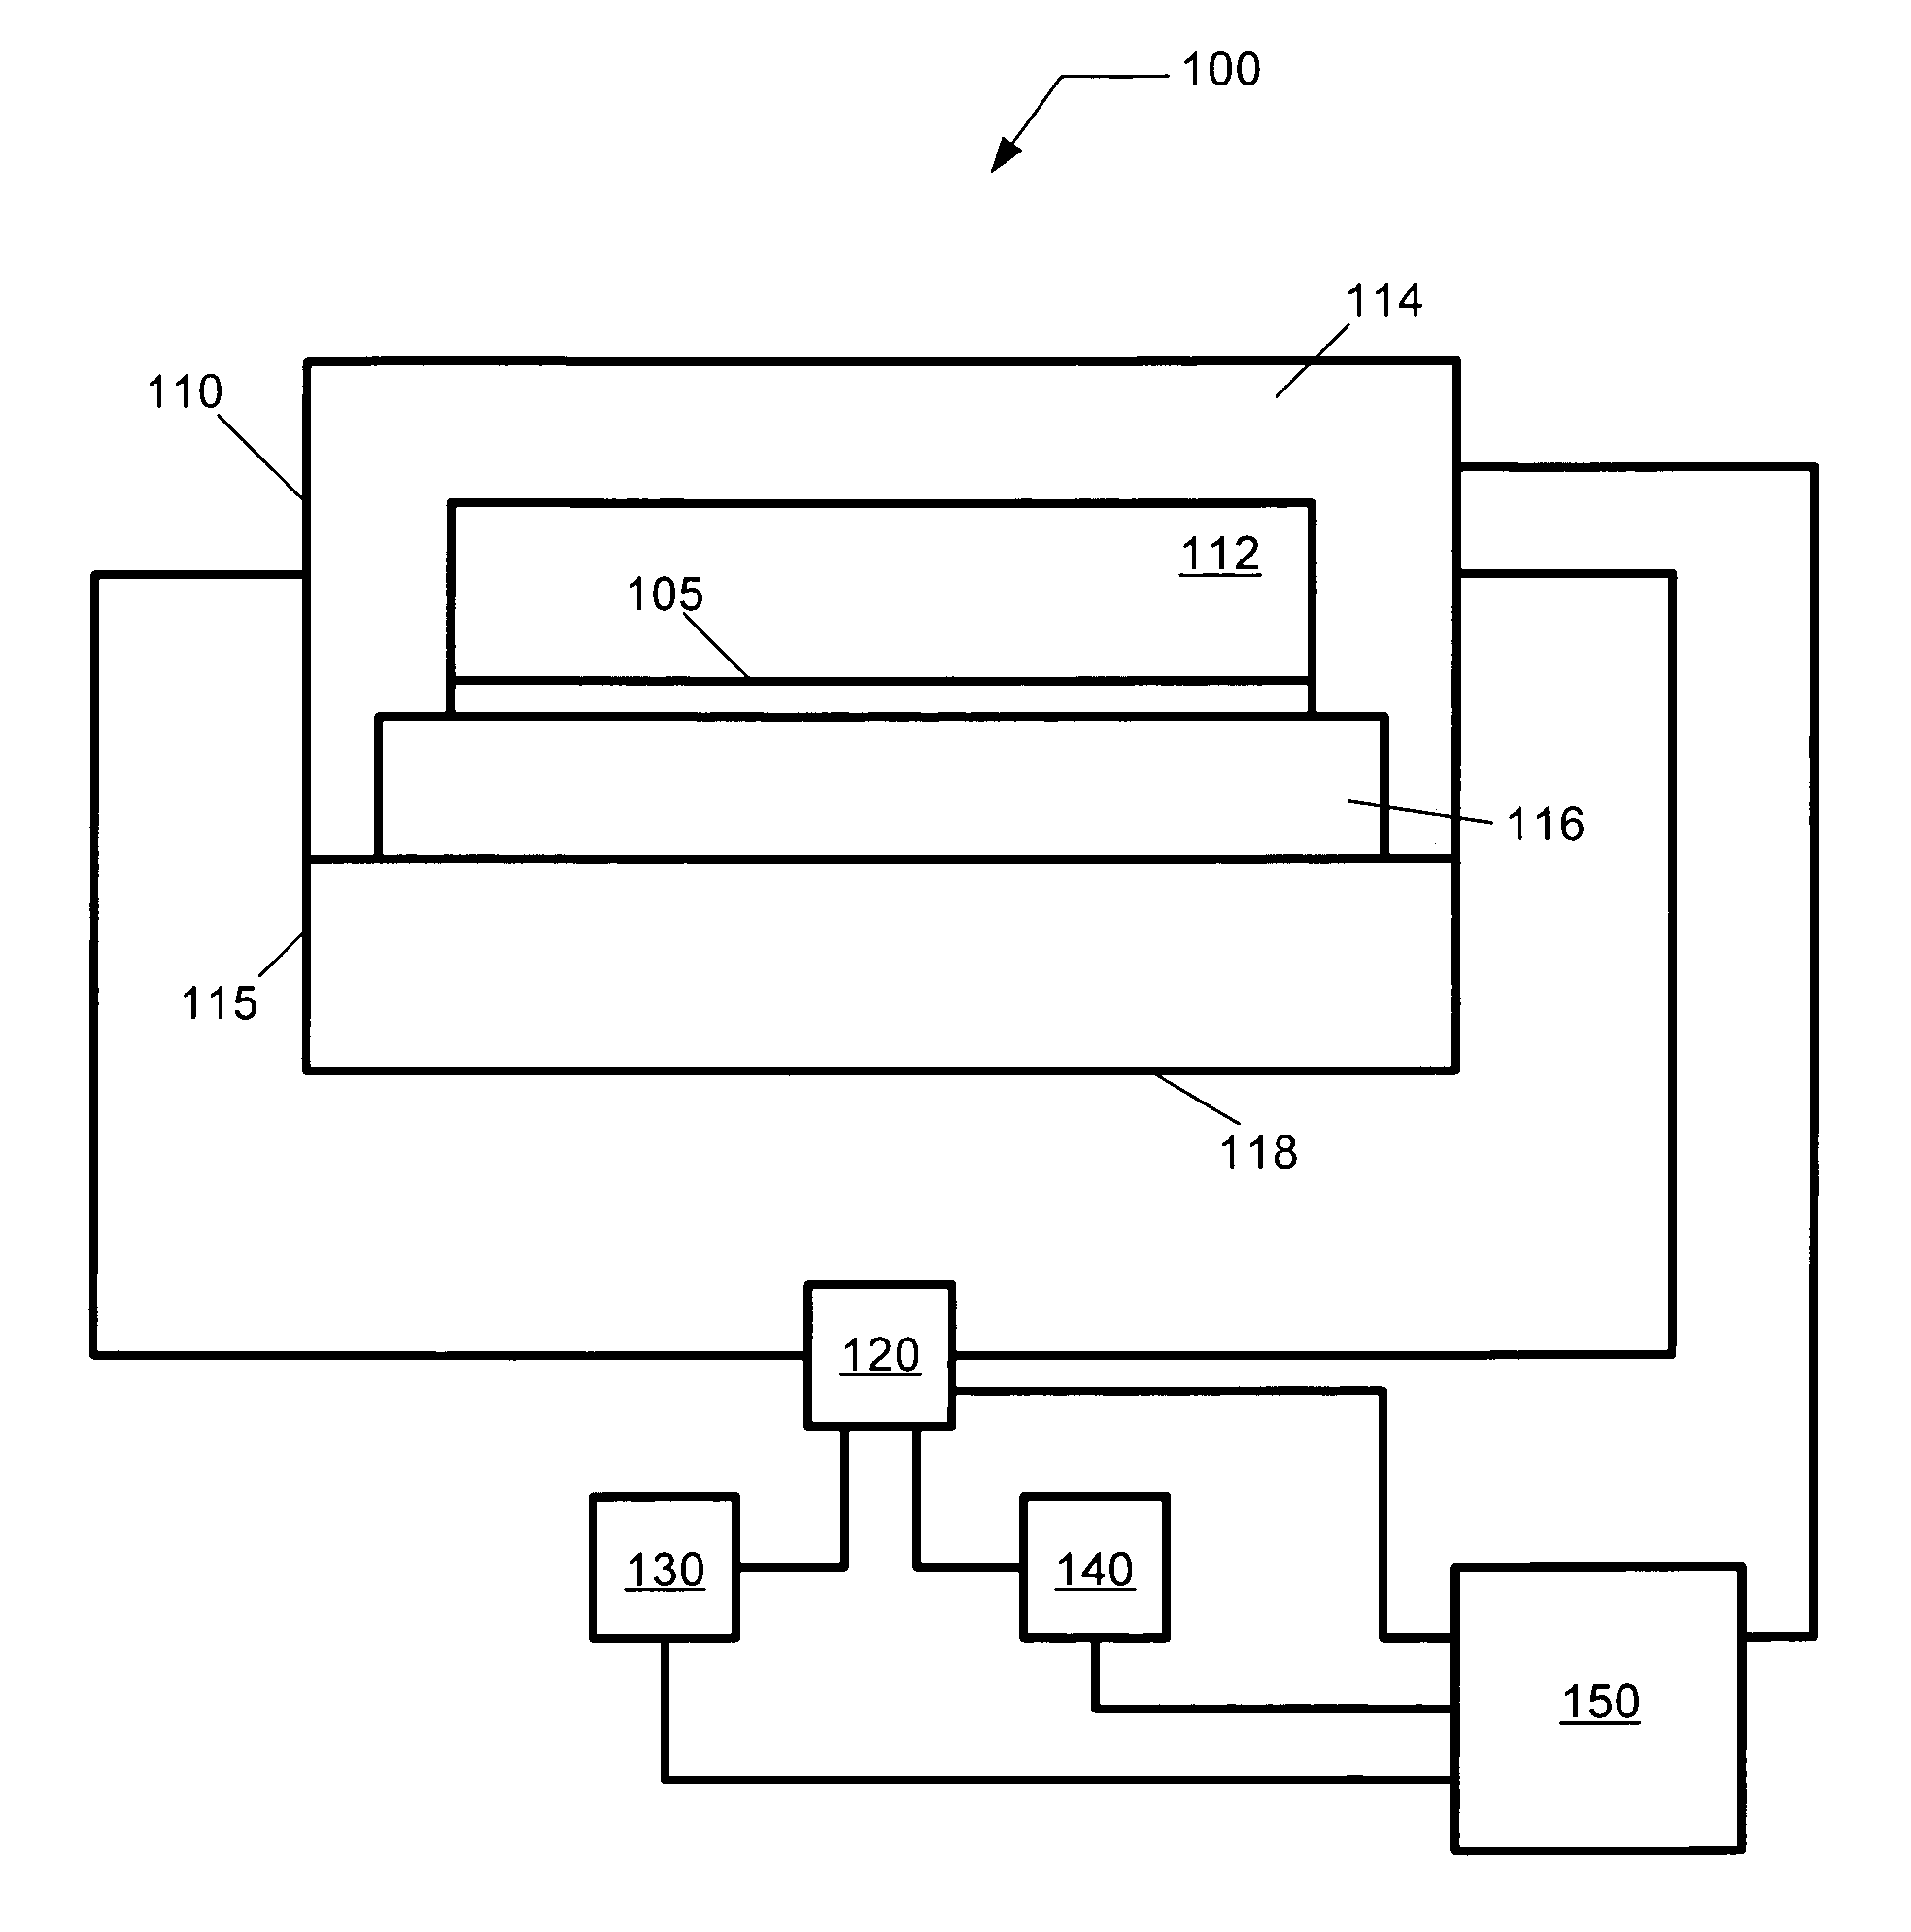 Supercritical fluid processing system having a coating on internal members and a method of using